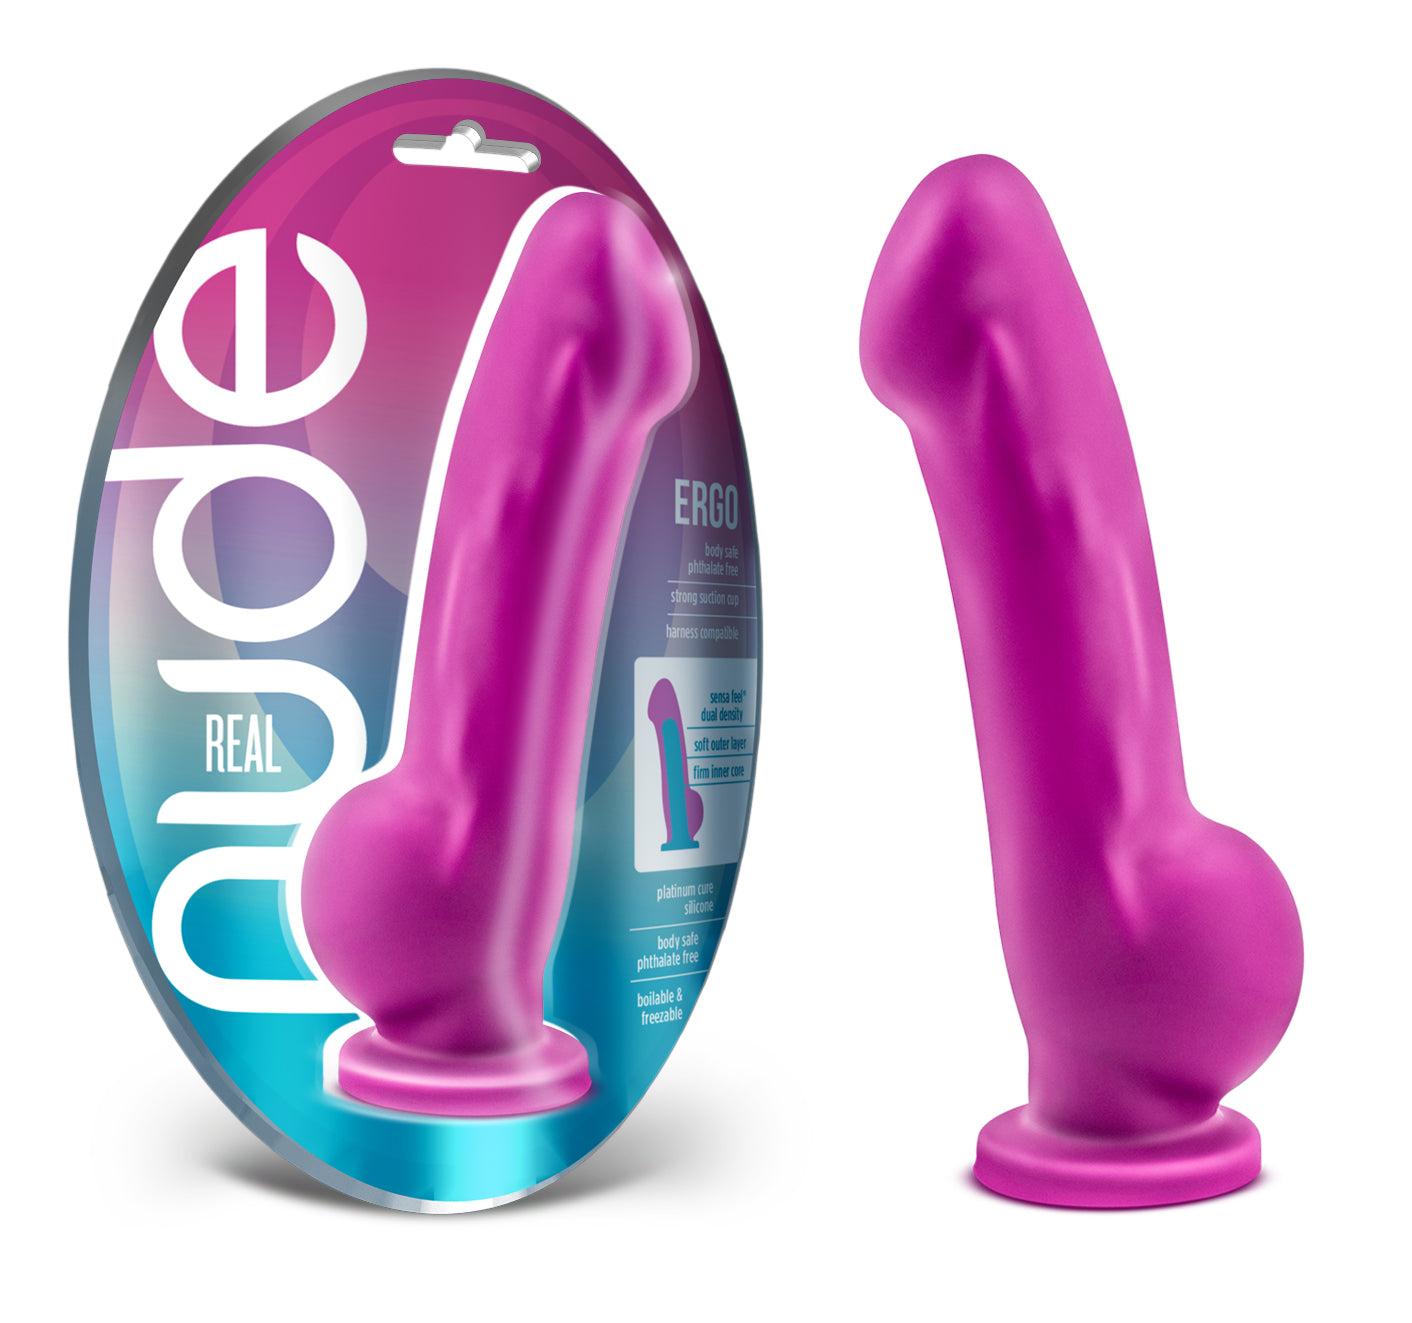 Real Nude Ergo Violet - Just for you desires